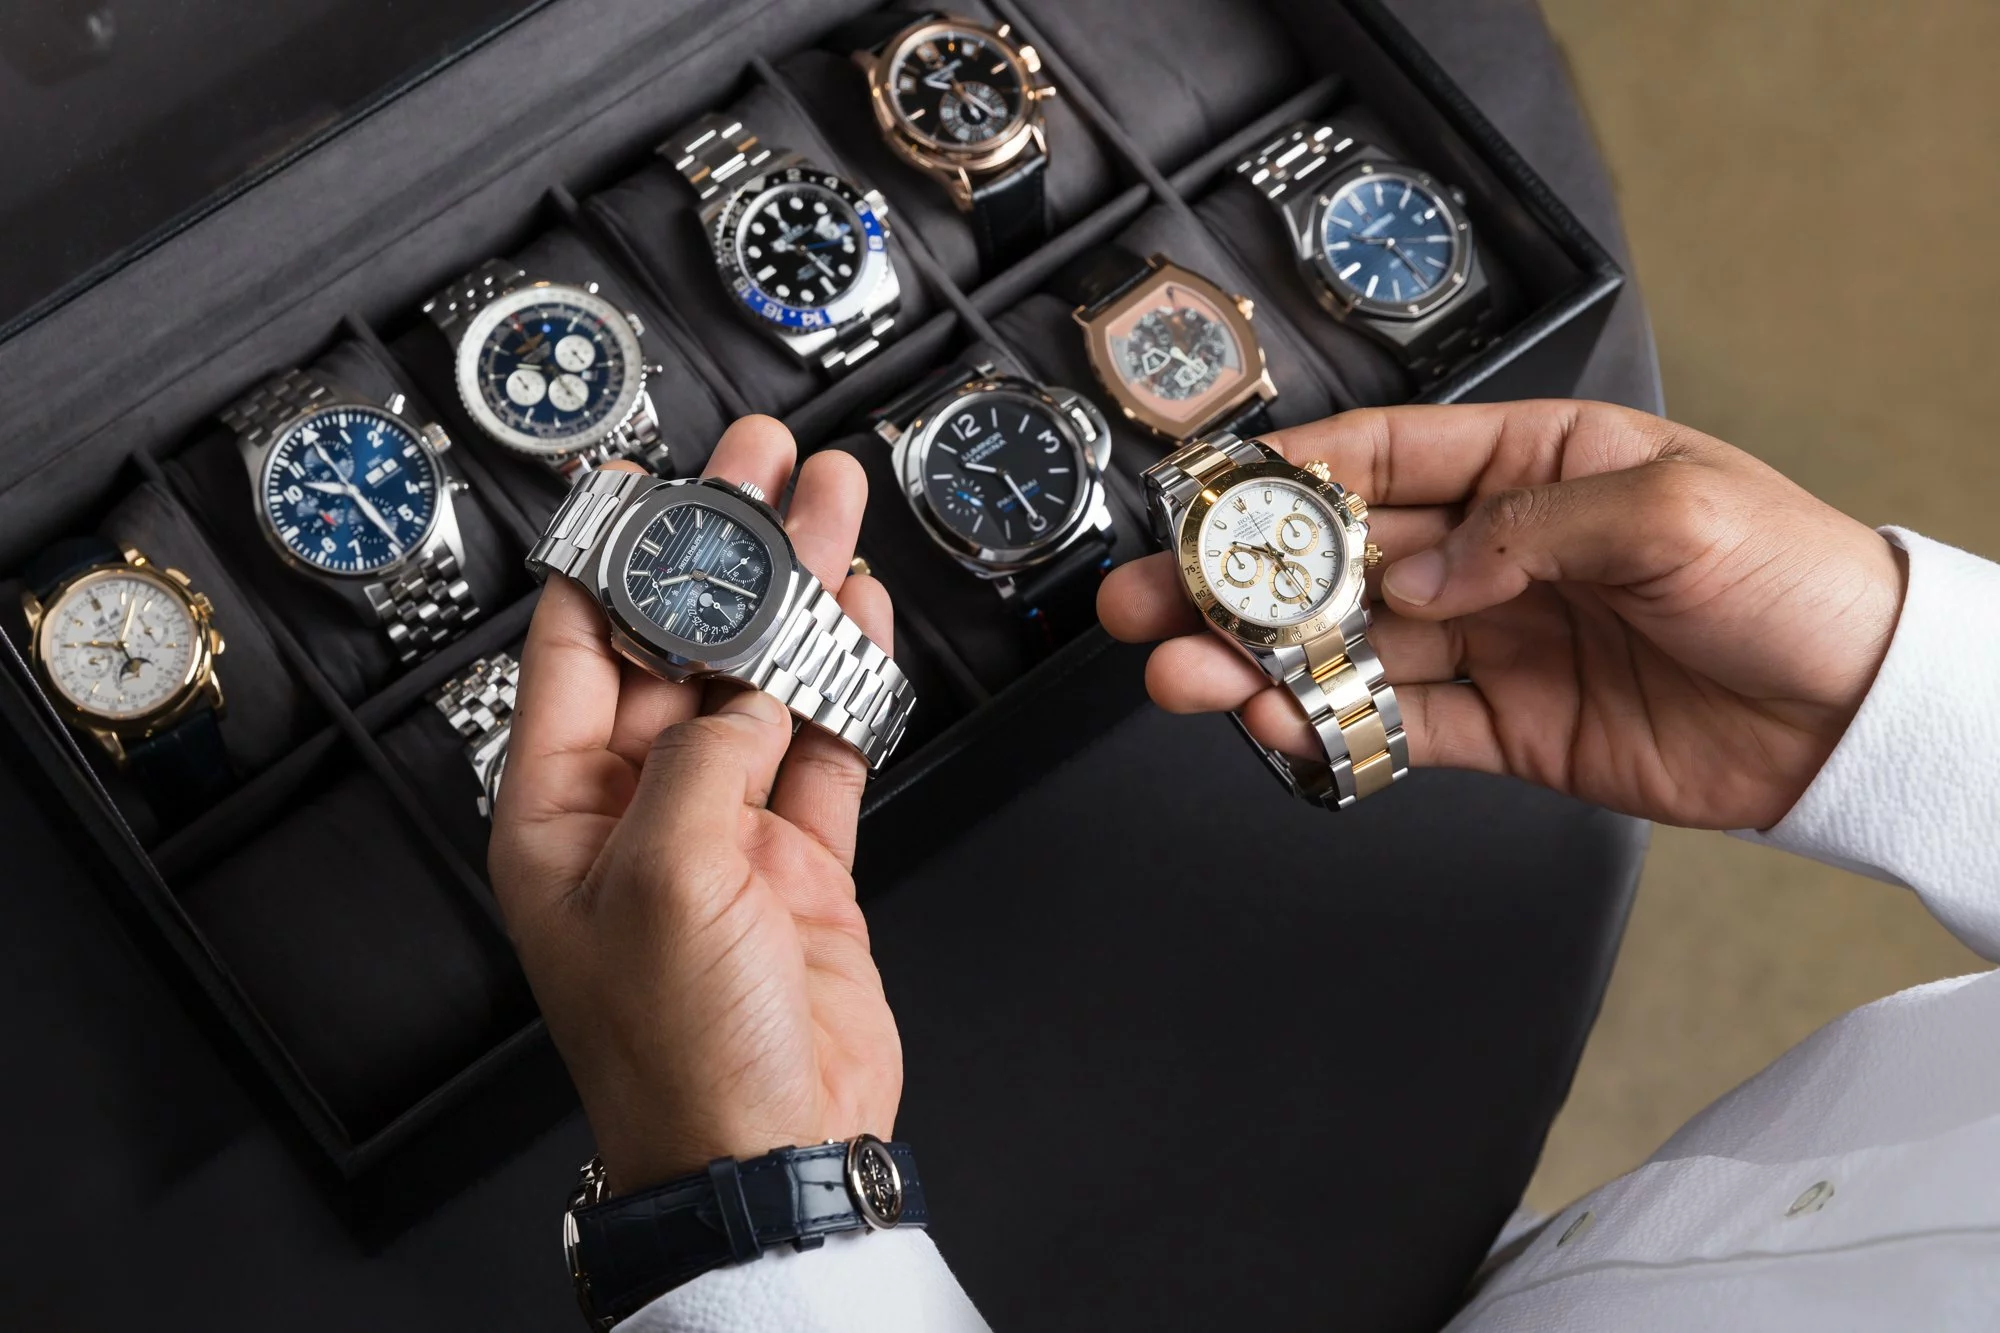 Watches as investment: average prices of the top 10 luxury watch